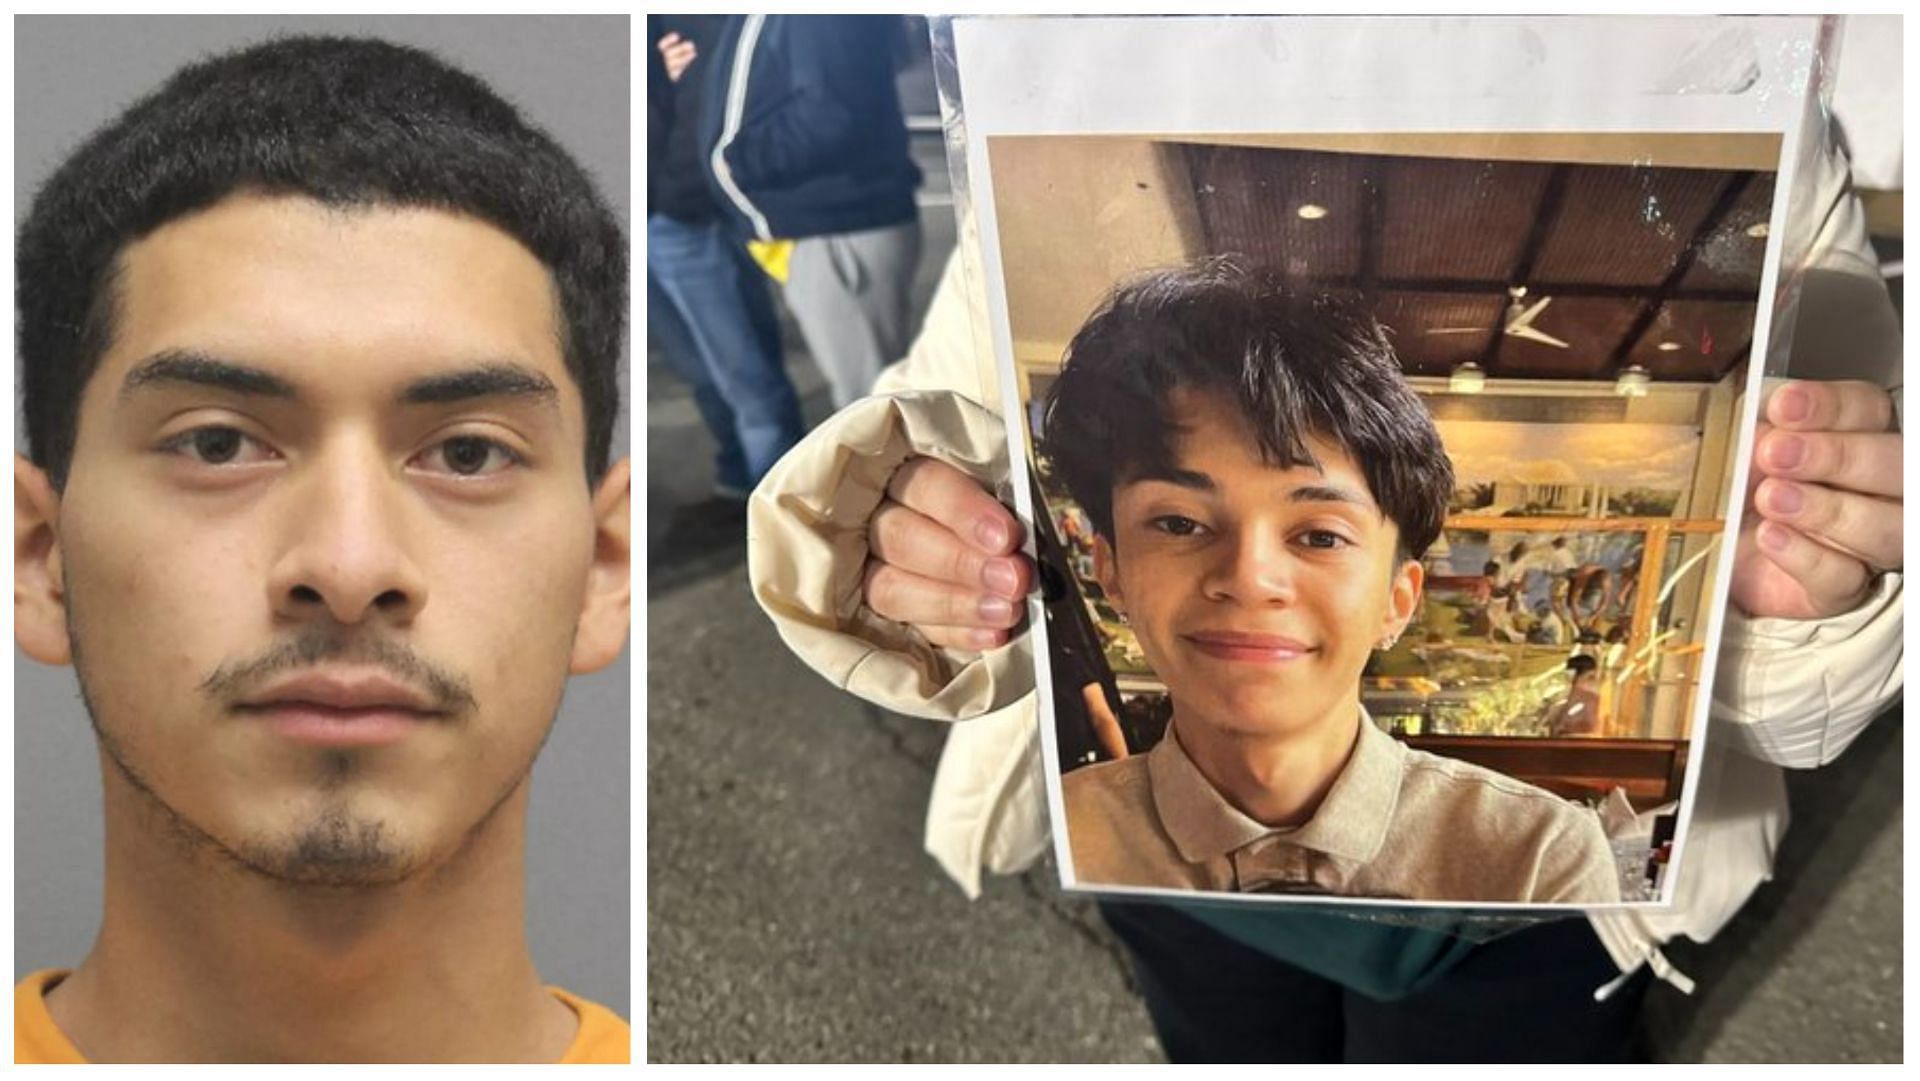 Jose Guerrero (right) was allegedly stabbed by Olvin (left) and another suspect, (Images via @KatieLusso/Twitter)